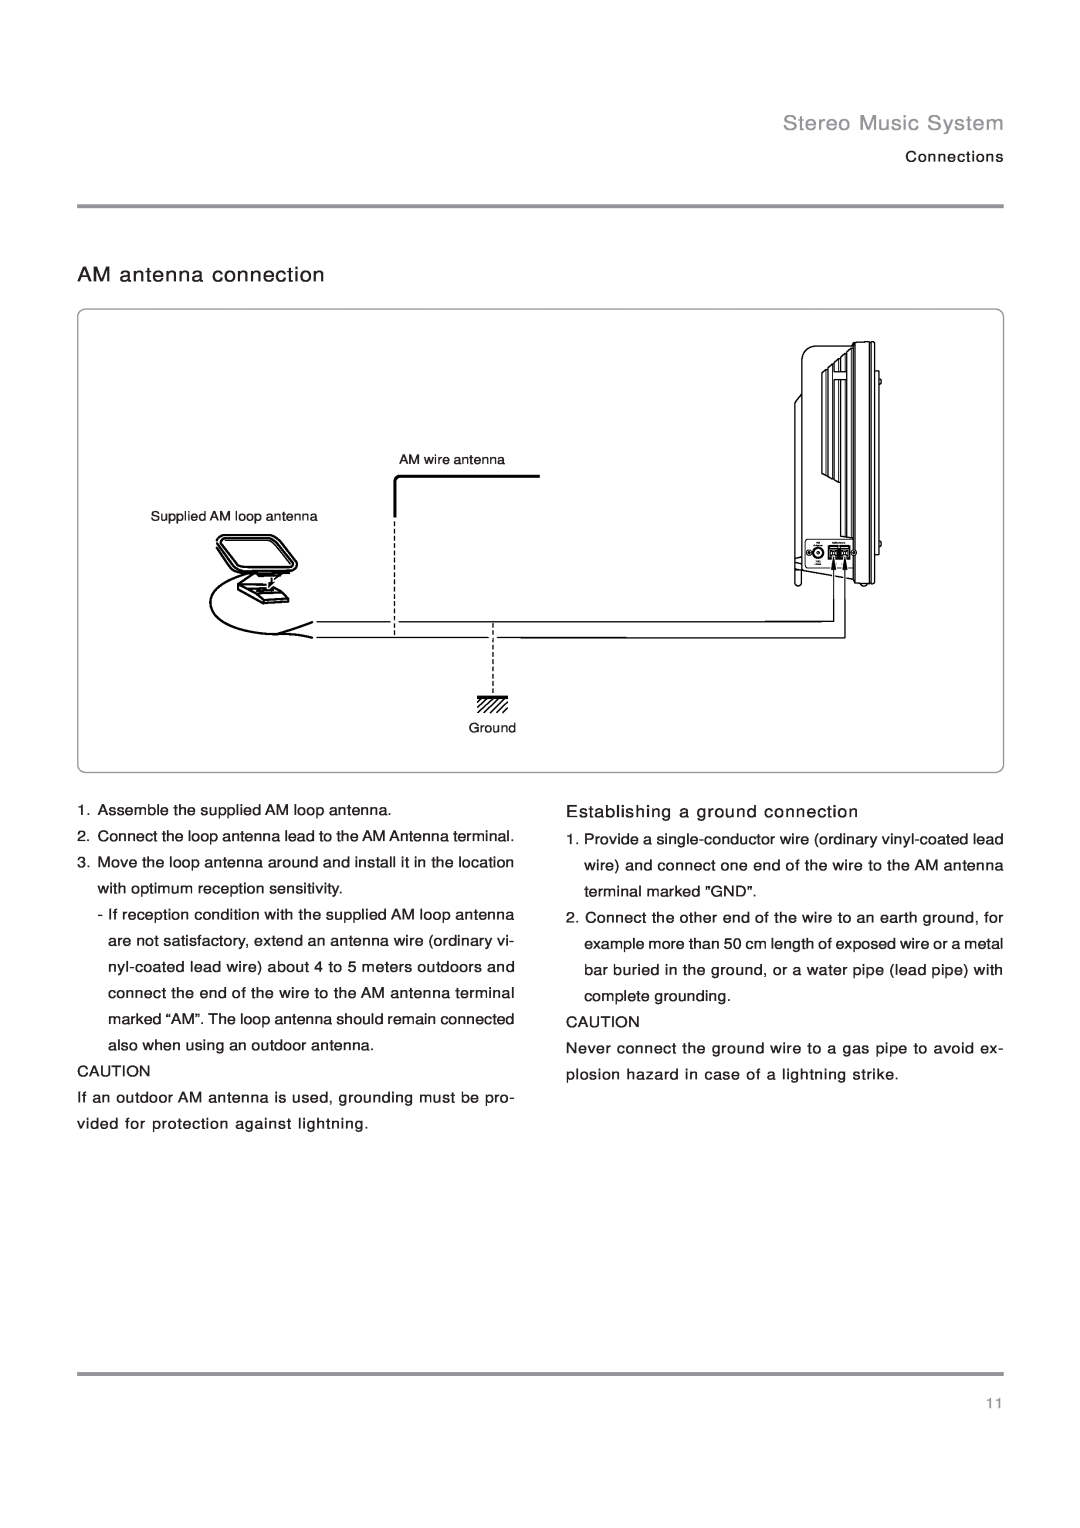 Nakamichi SoundSpace 5 owner manual AM antenna connection, Stereo Music System, Establishing a ground connection 